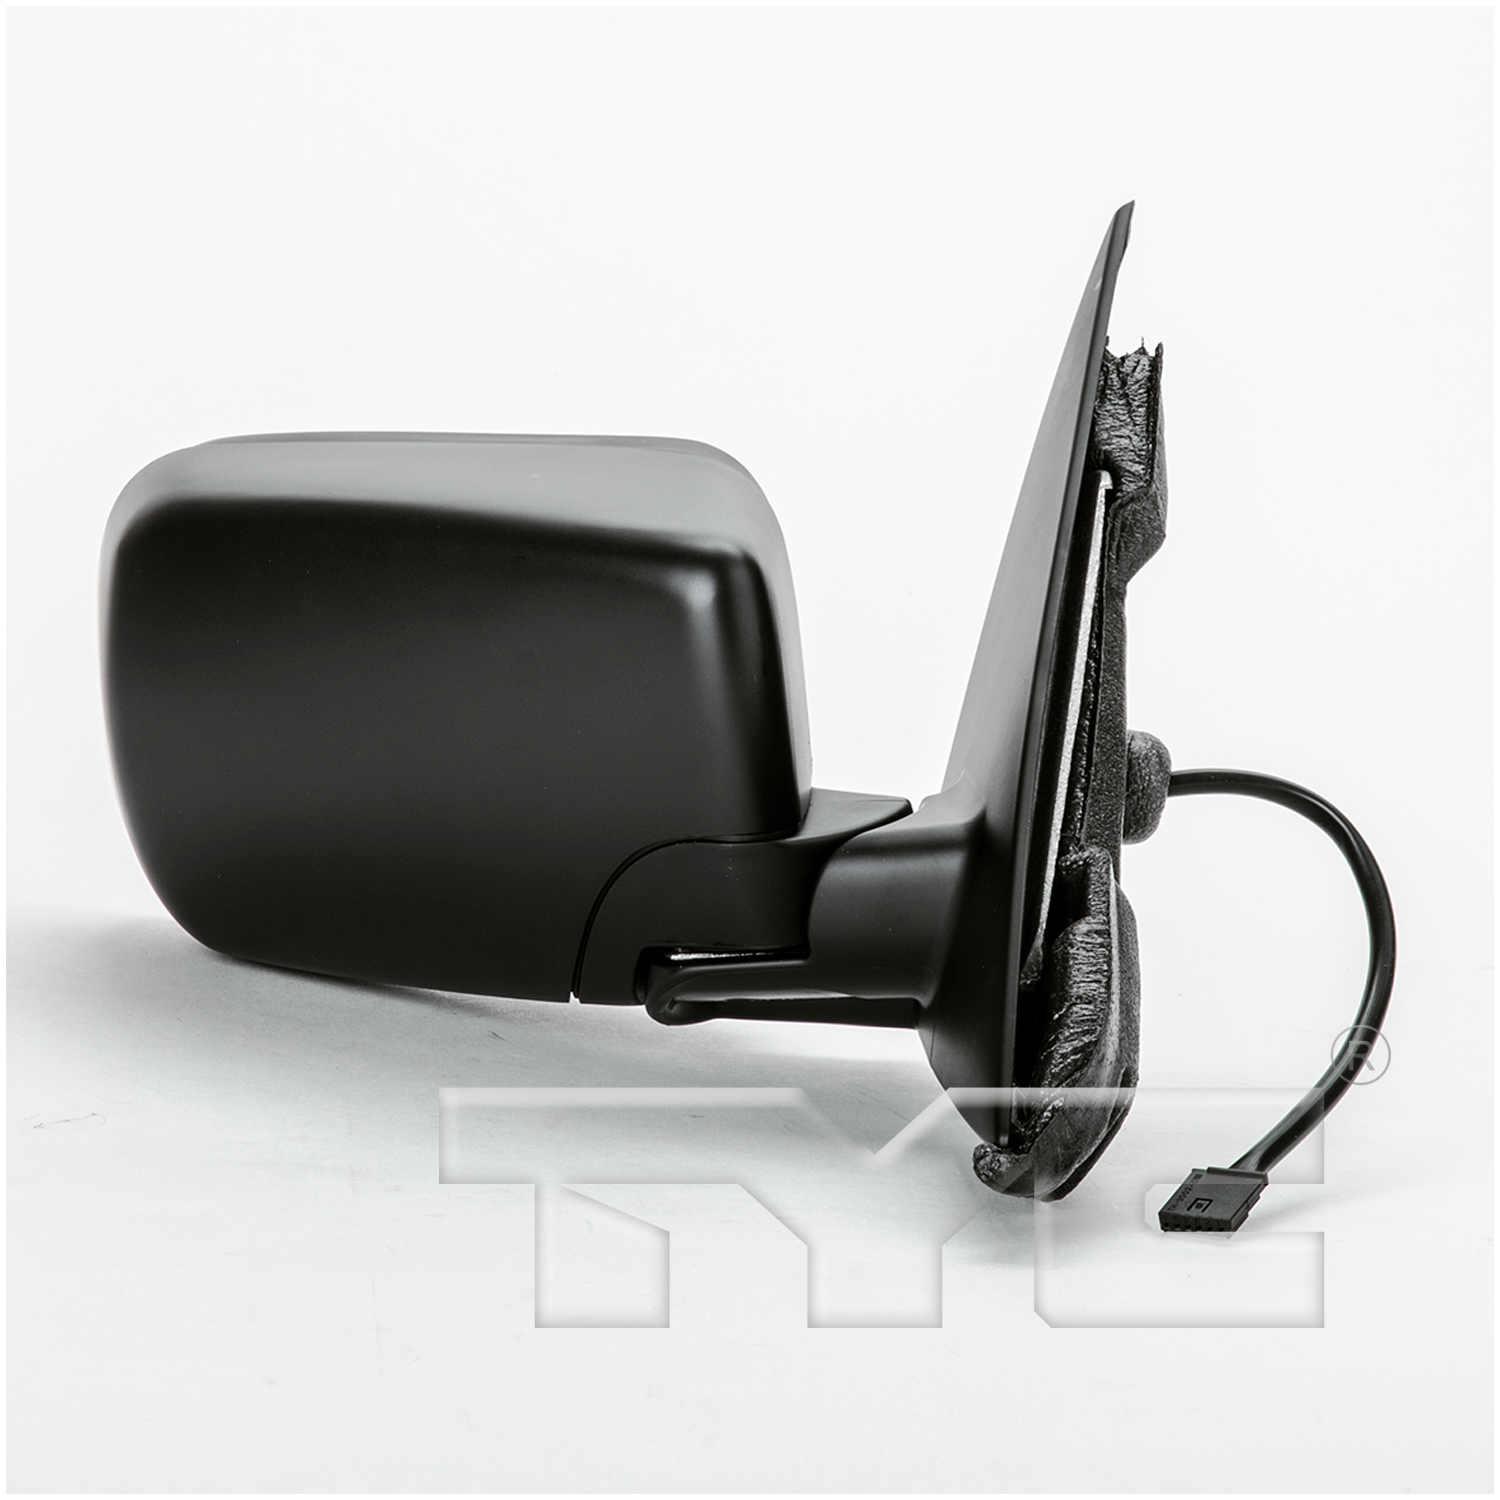 Aftermarket MIRRORS for BMW - 323I, 323i,99-06,RT Mirror outside rear view